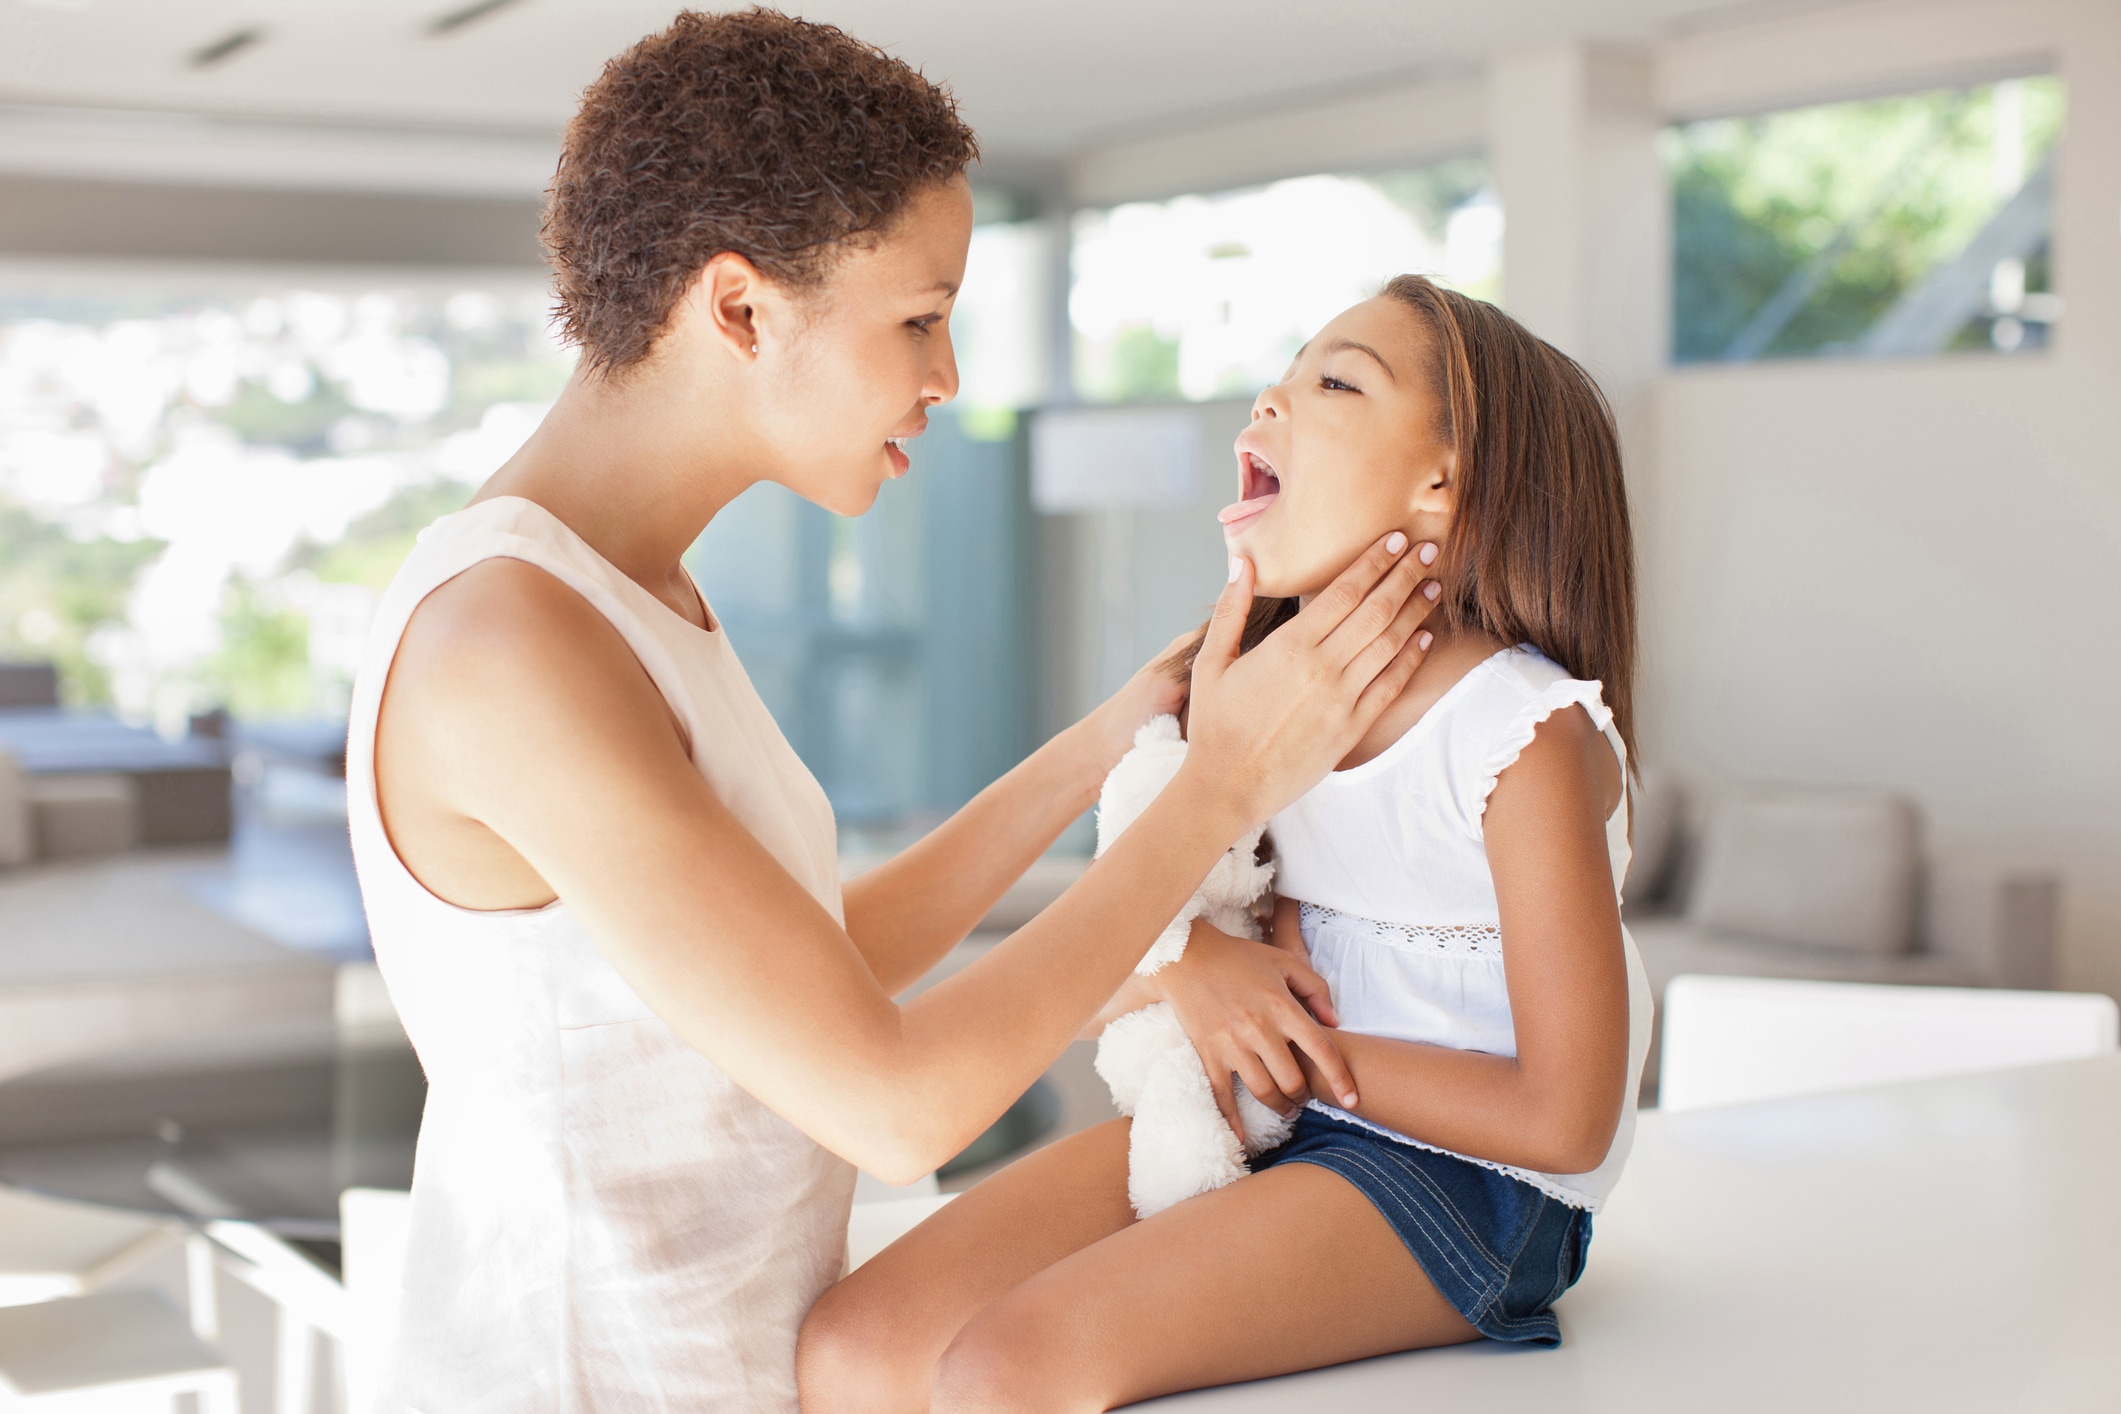 Strep throat in kids: Here’s what to know so you don’t stress